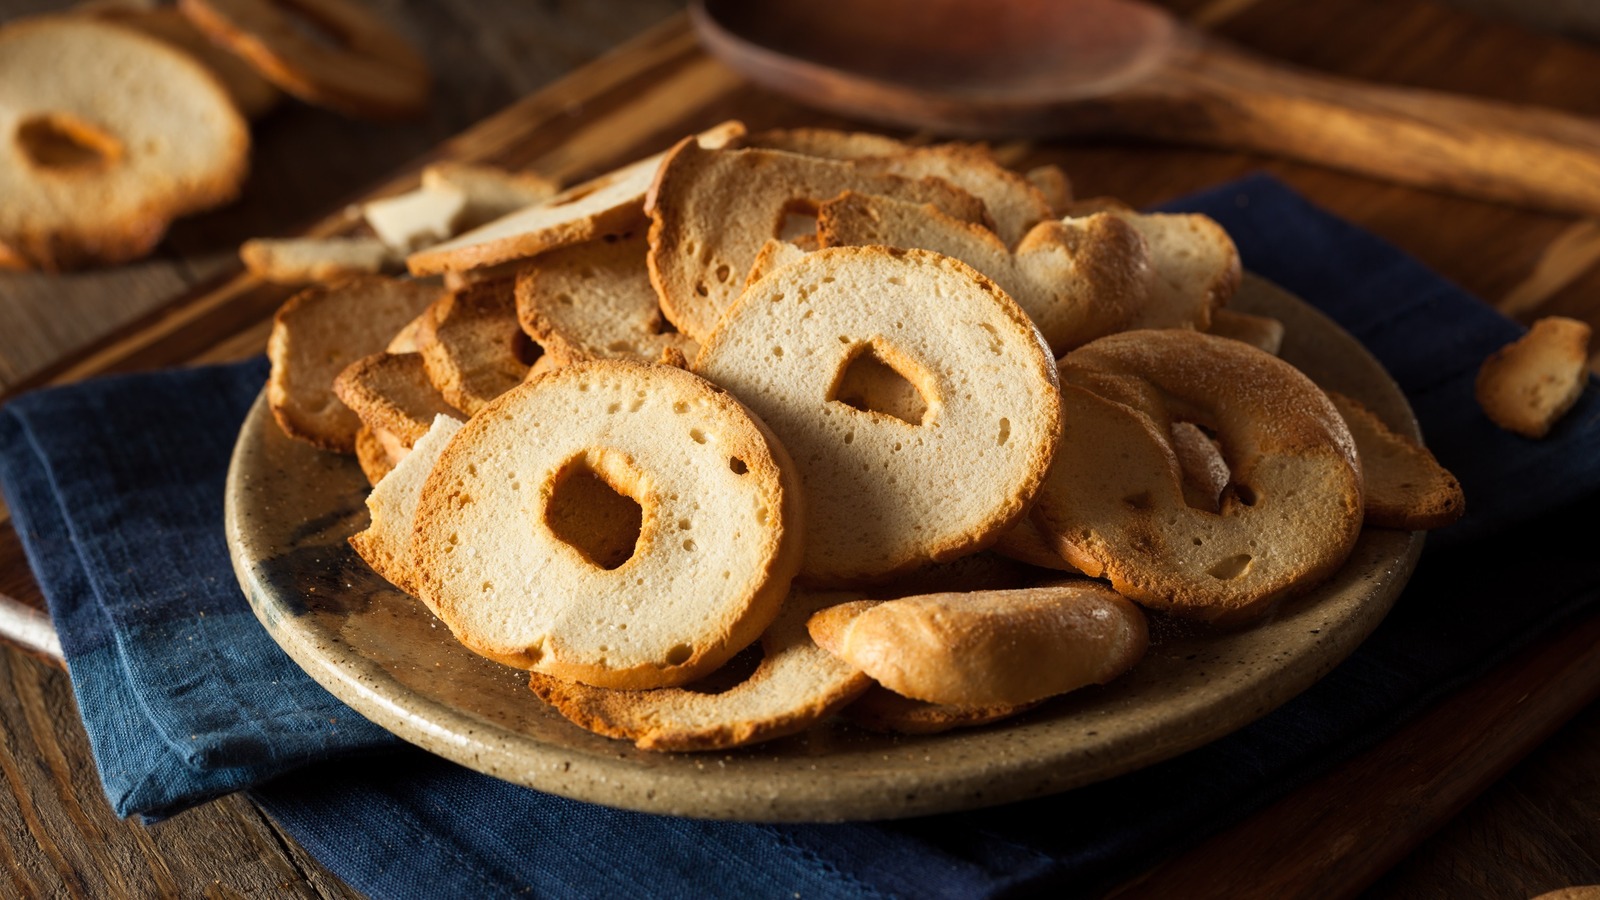 Transform your stale bagels into a whole new snack with your air fryer